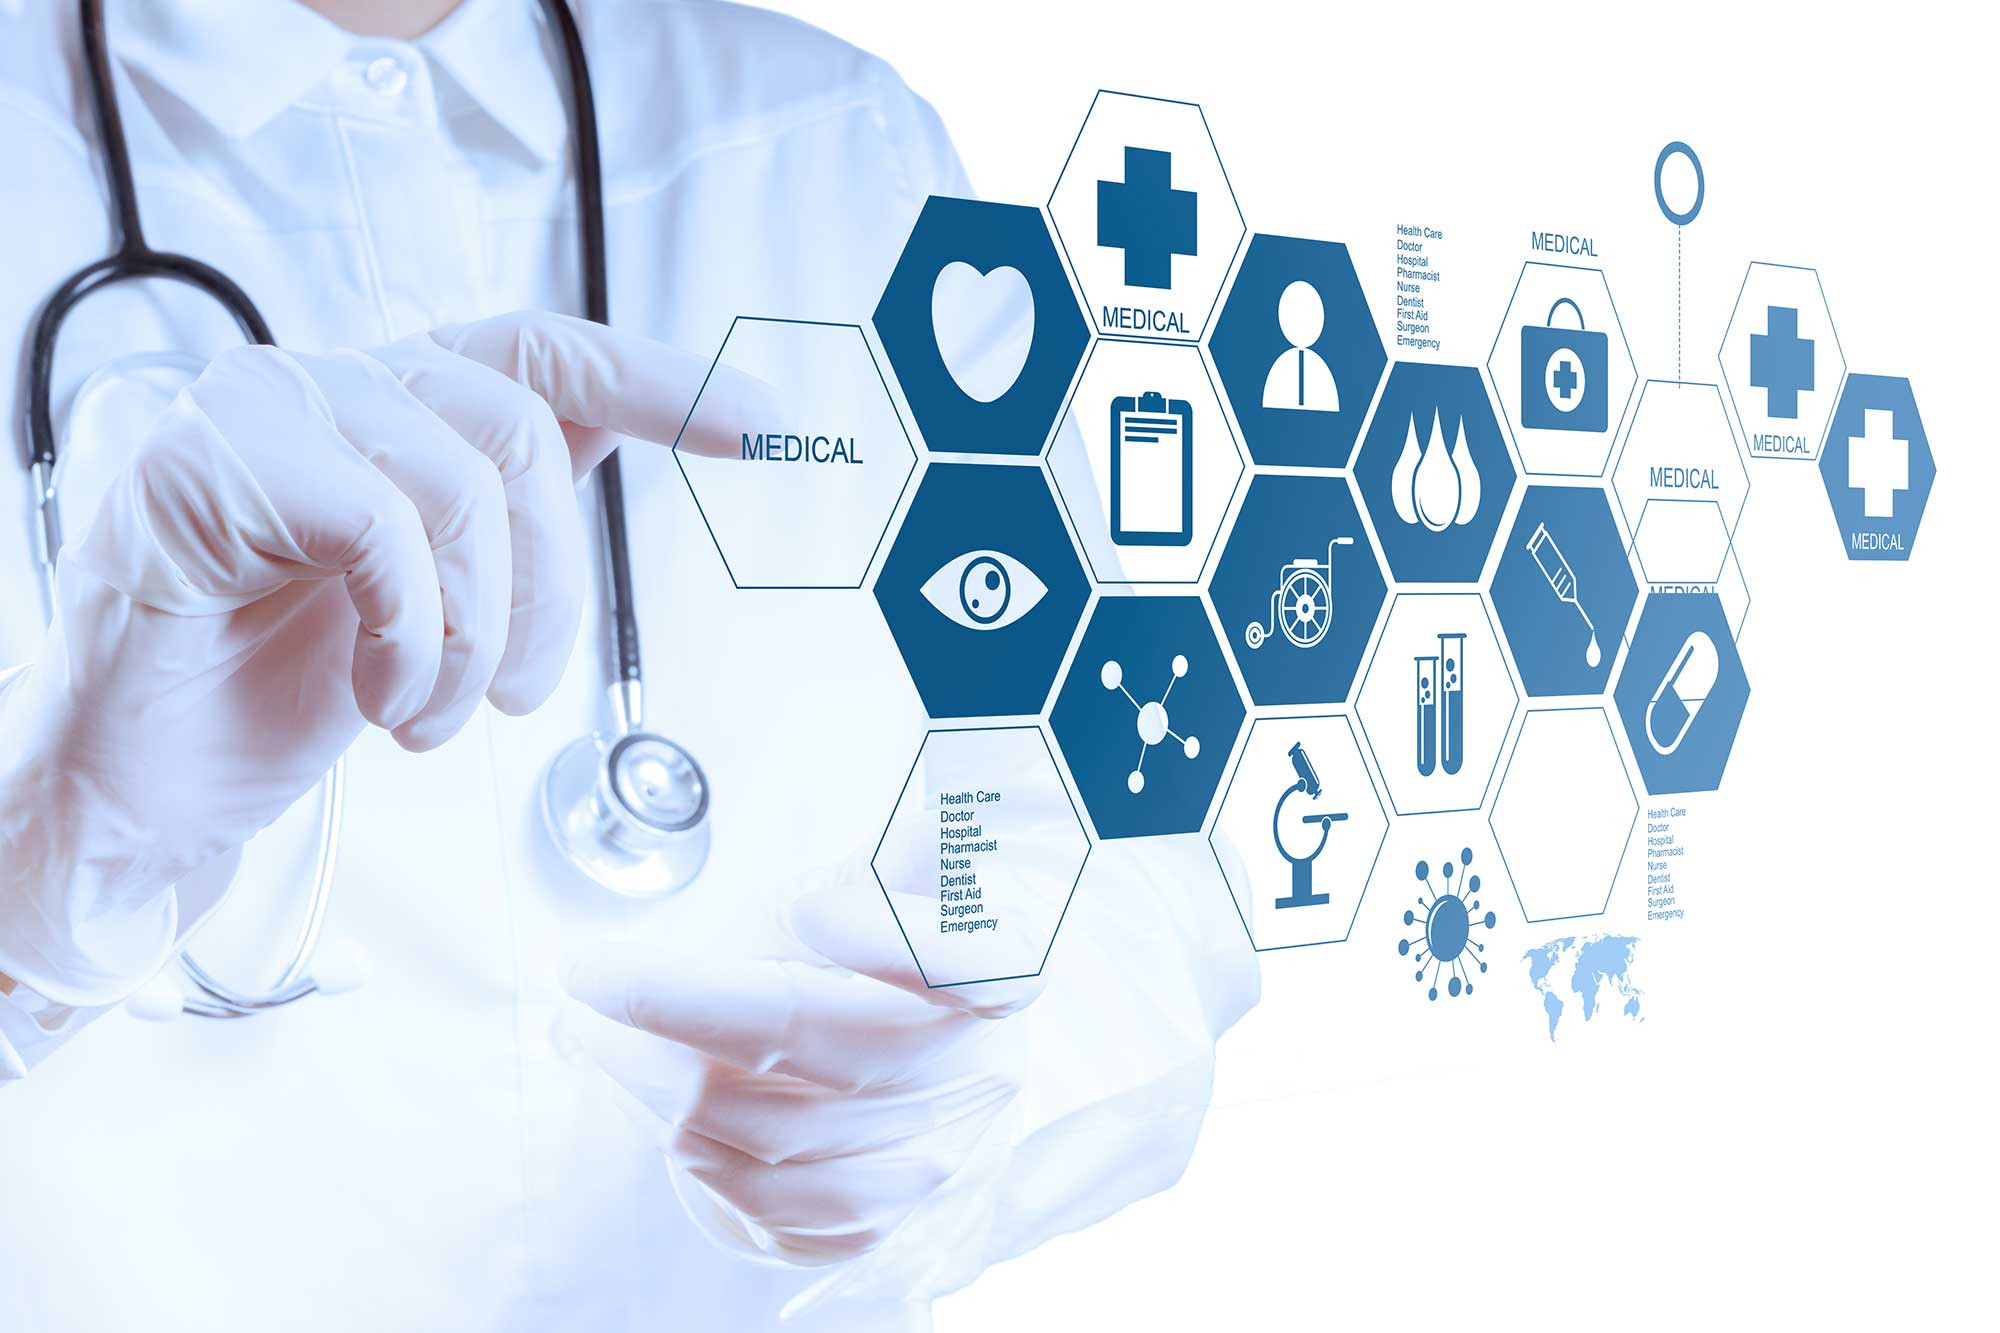 Digital & Human Health Care – 'And' not 'Or' - IPsoft